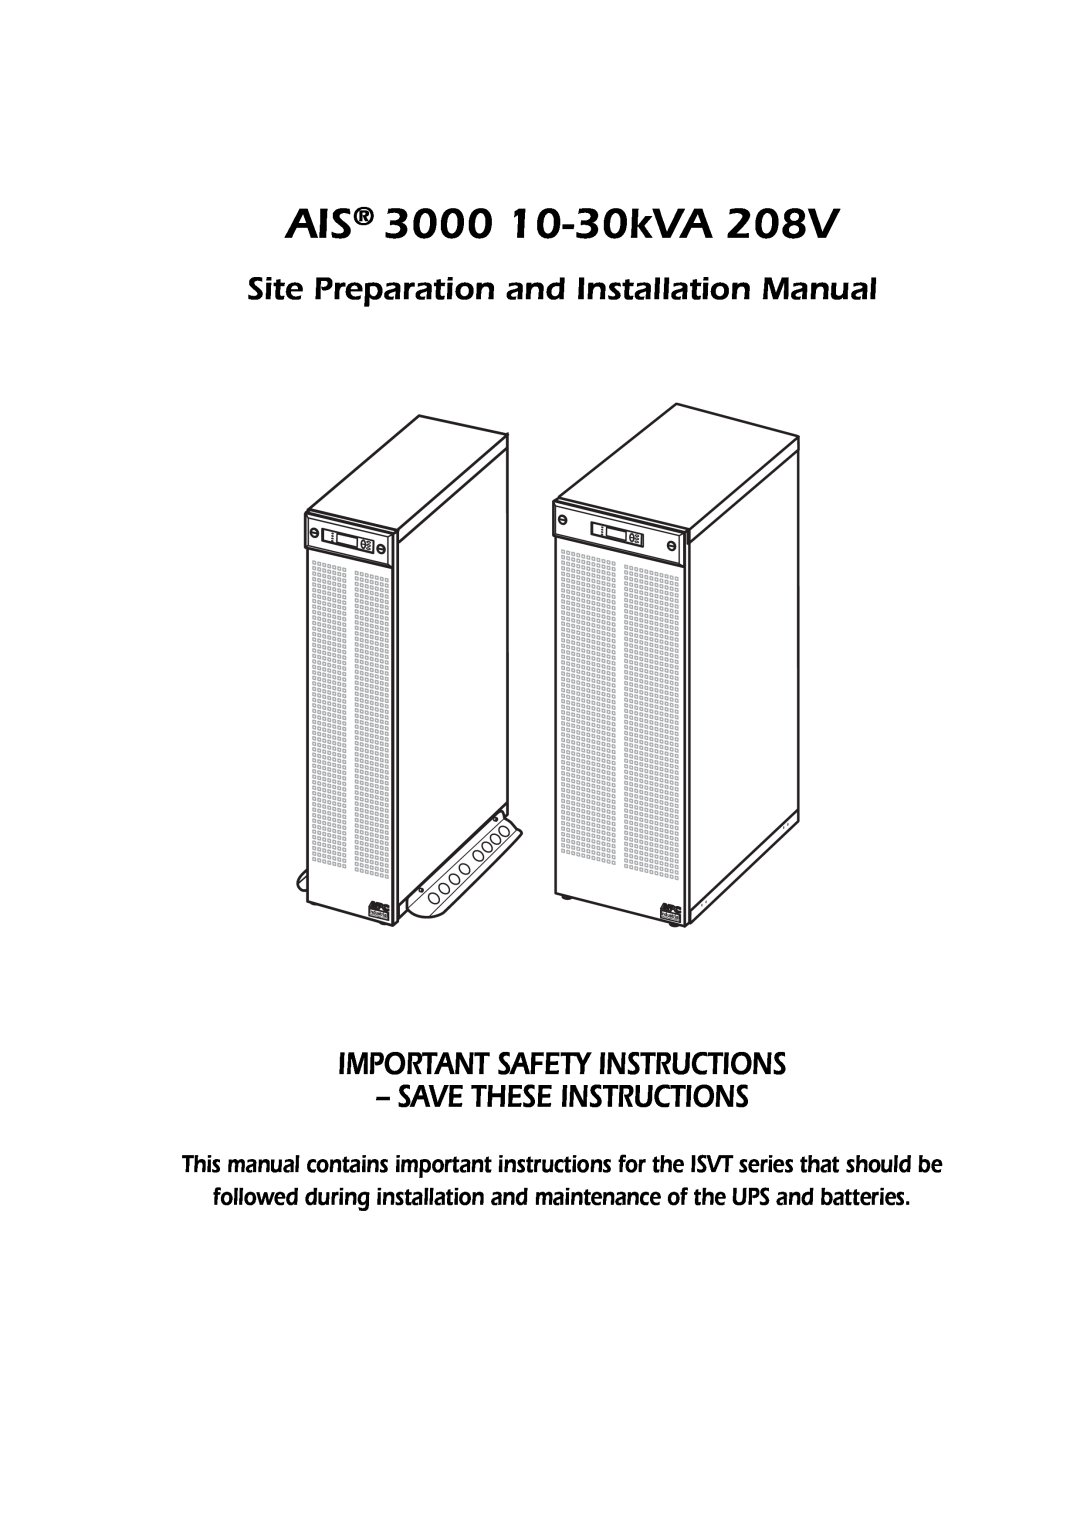 APC 3000 Site Preparation and Installation Manual, Important Safety Instructions Save These Instructions 